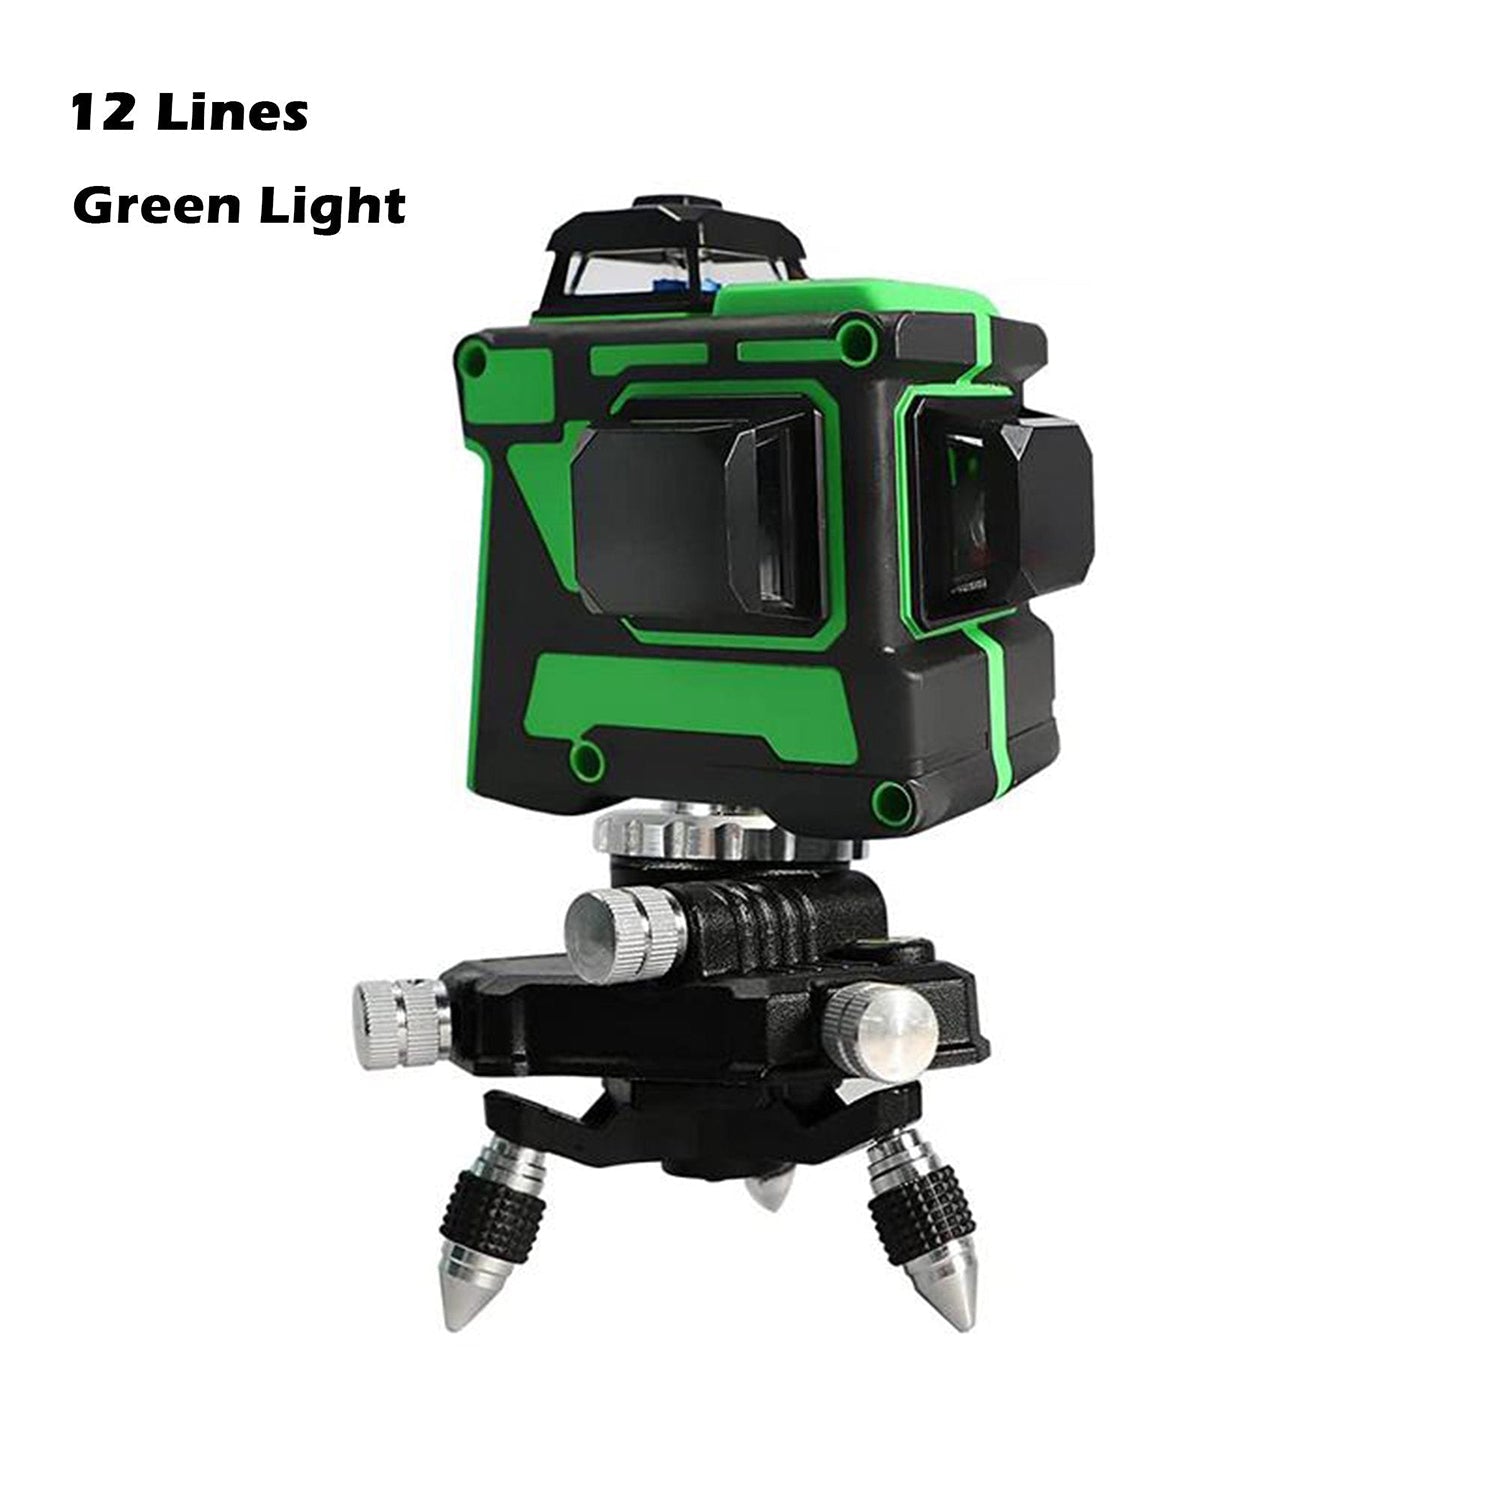 ECVV Professional Laser Level  Self-leveling 360°3D Green Cross Light Horizontal and Vertical Square Layout